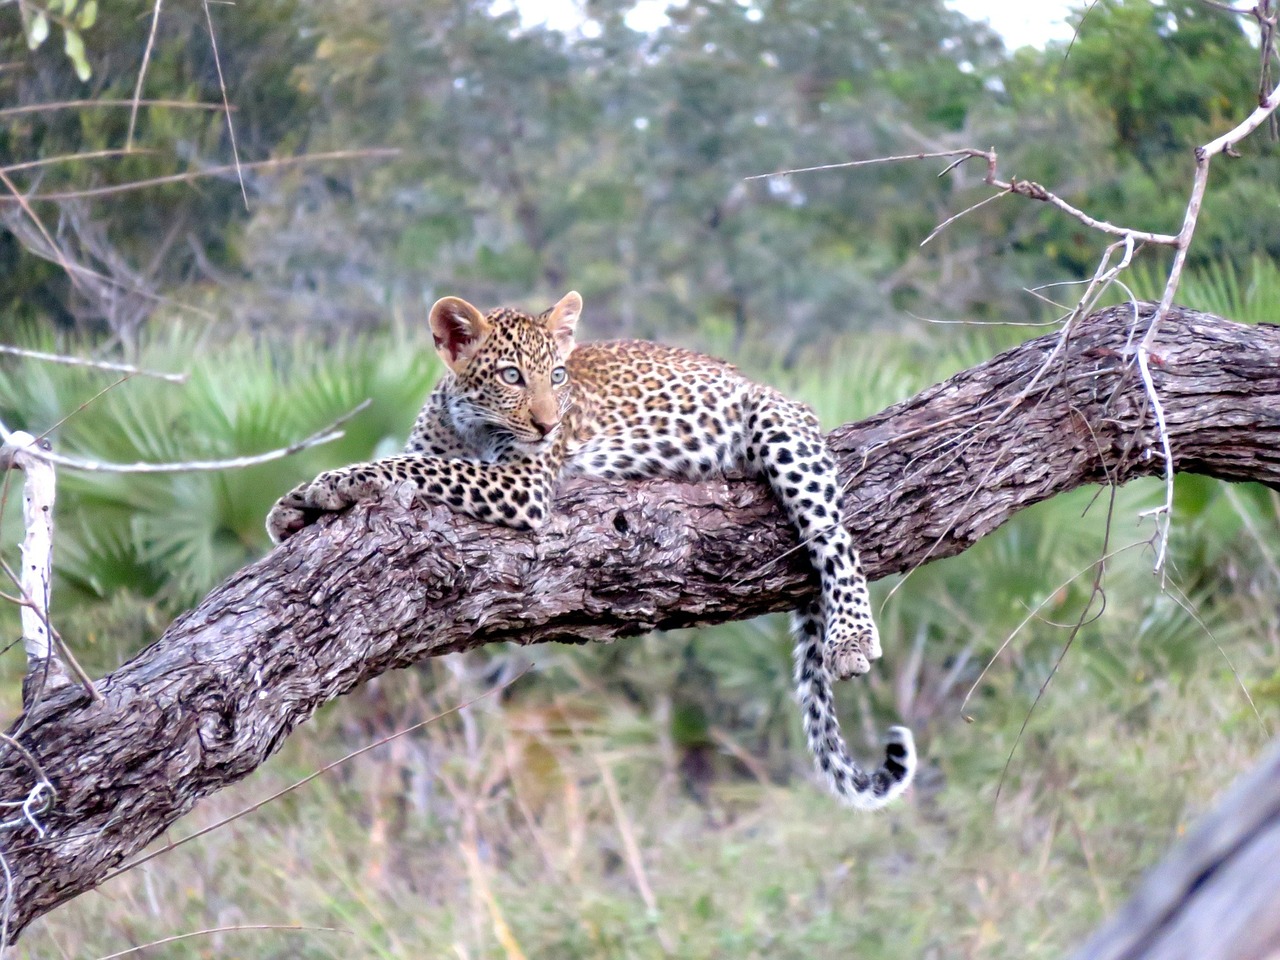 Leopard lazing in a tree in the Serengeti plains